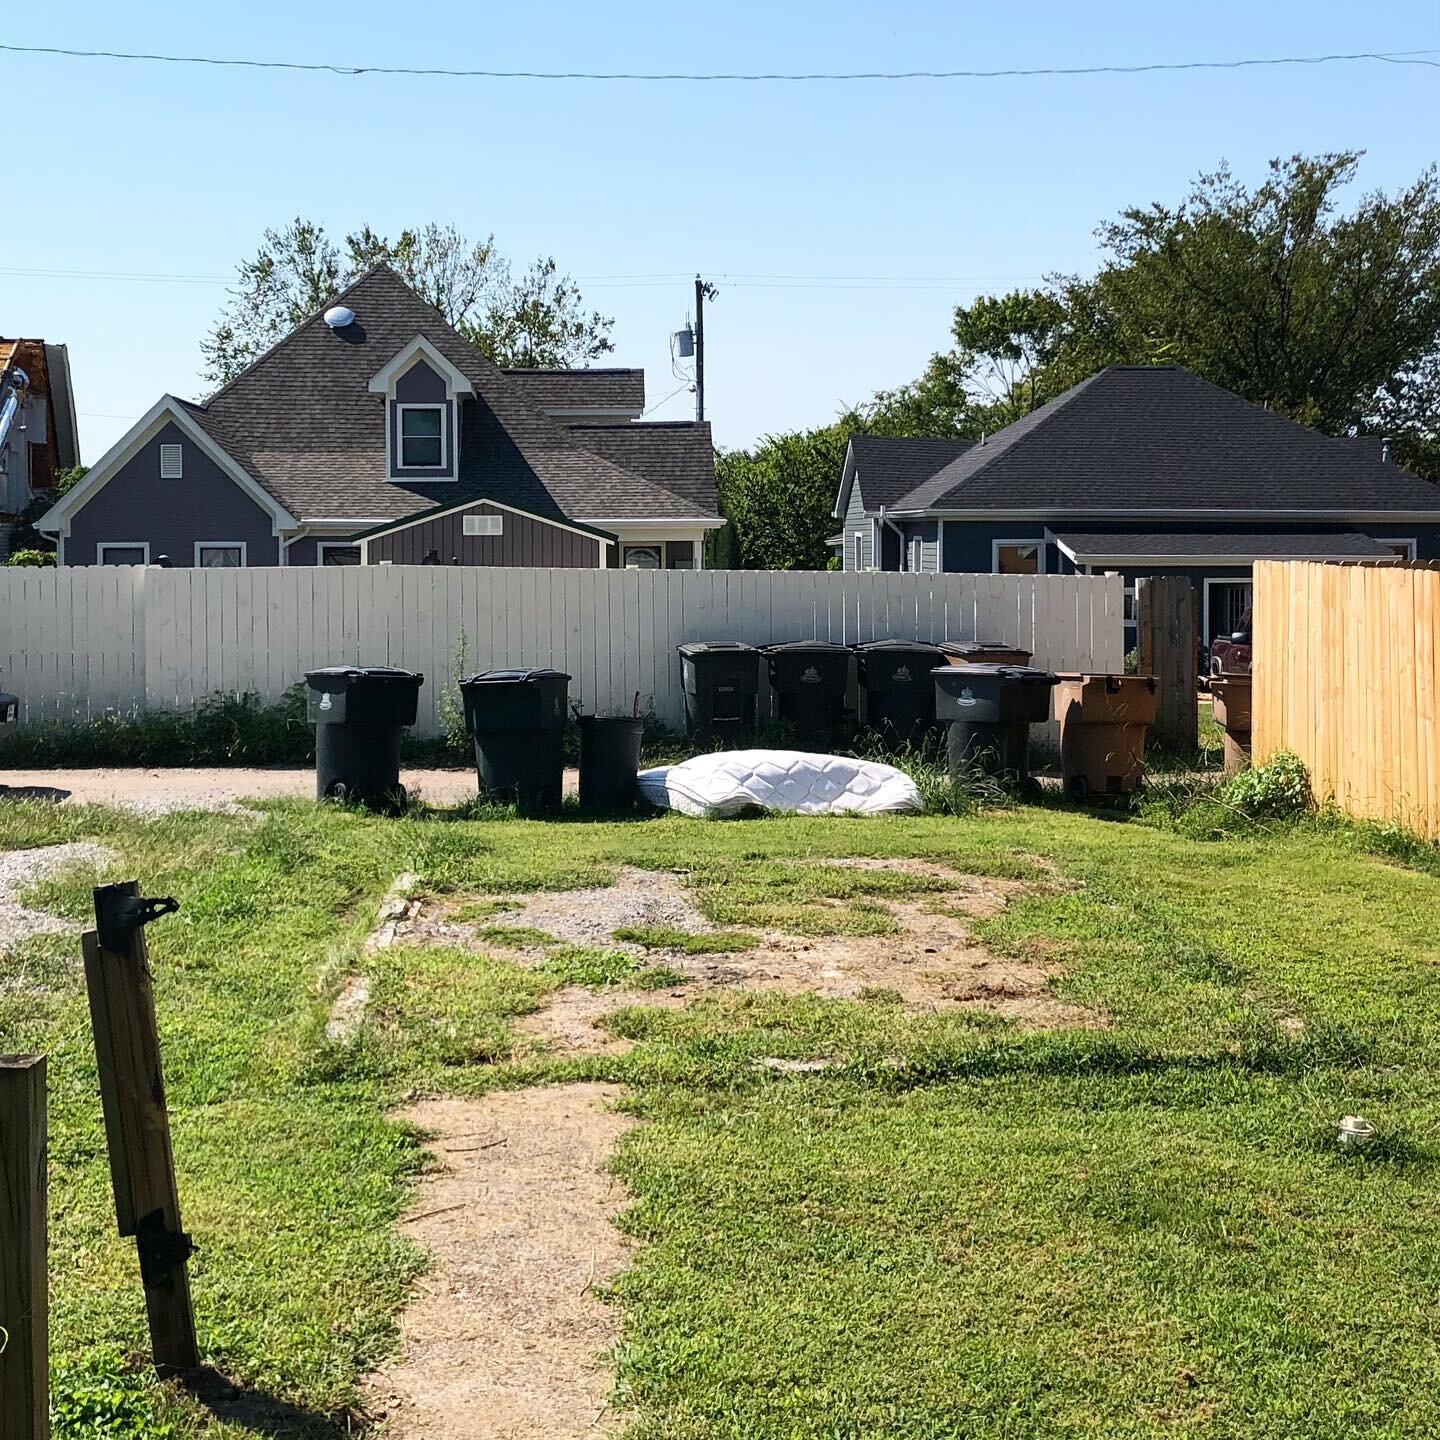 It&rsquo;s okay if your yard looks like this because we&rsquo;ll make it look so much better. #fence #garport #privacy #concreteslab #bookonline #eastnashville #nashville #parking #garportscom